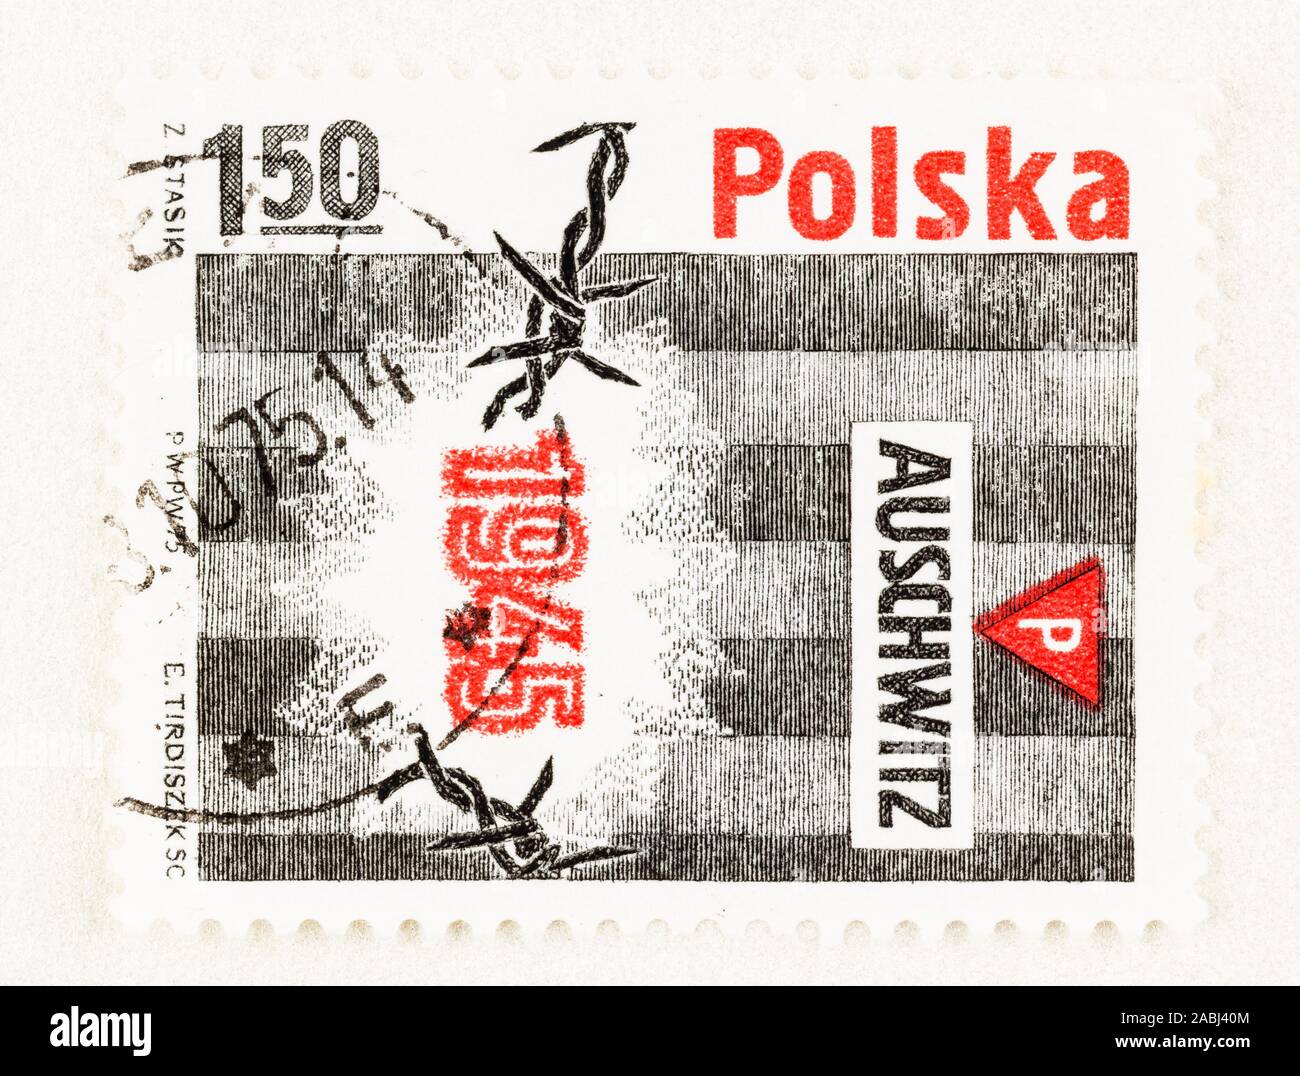 SEATTLE WASHINGTON - November 21, 2019: Postage stamp of 1975 in remembrance of liberation of Auschwitz Concentration Camp in 1945. Stock Photo